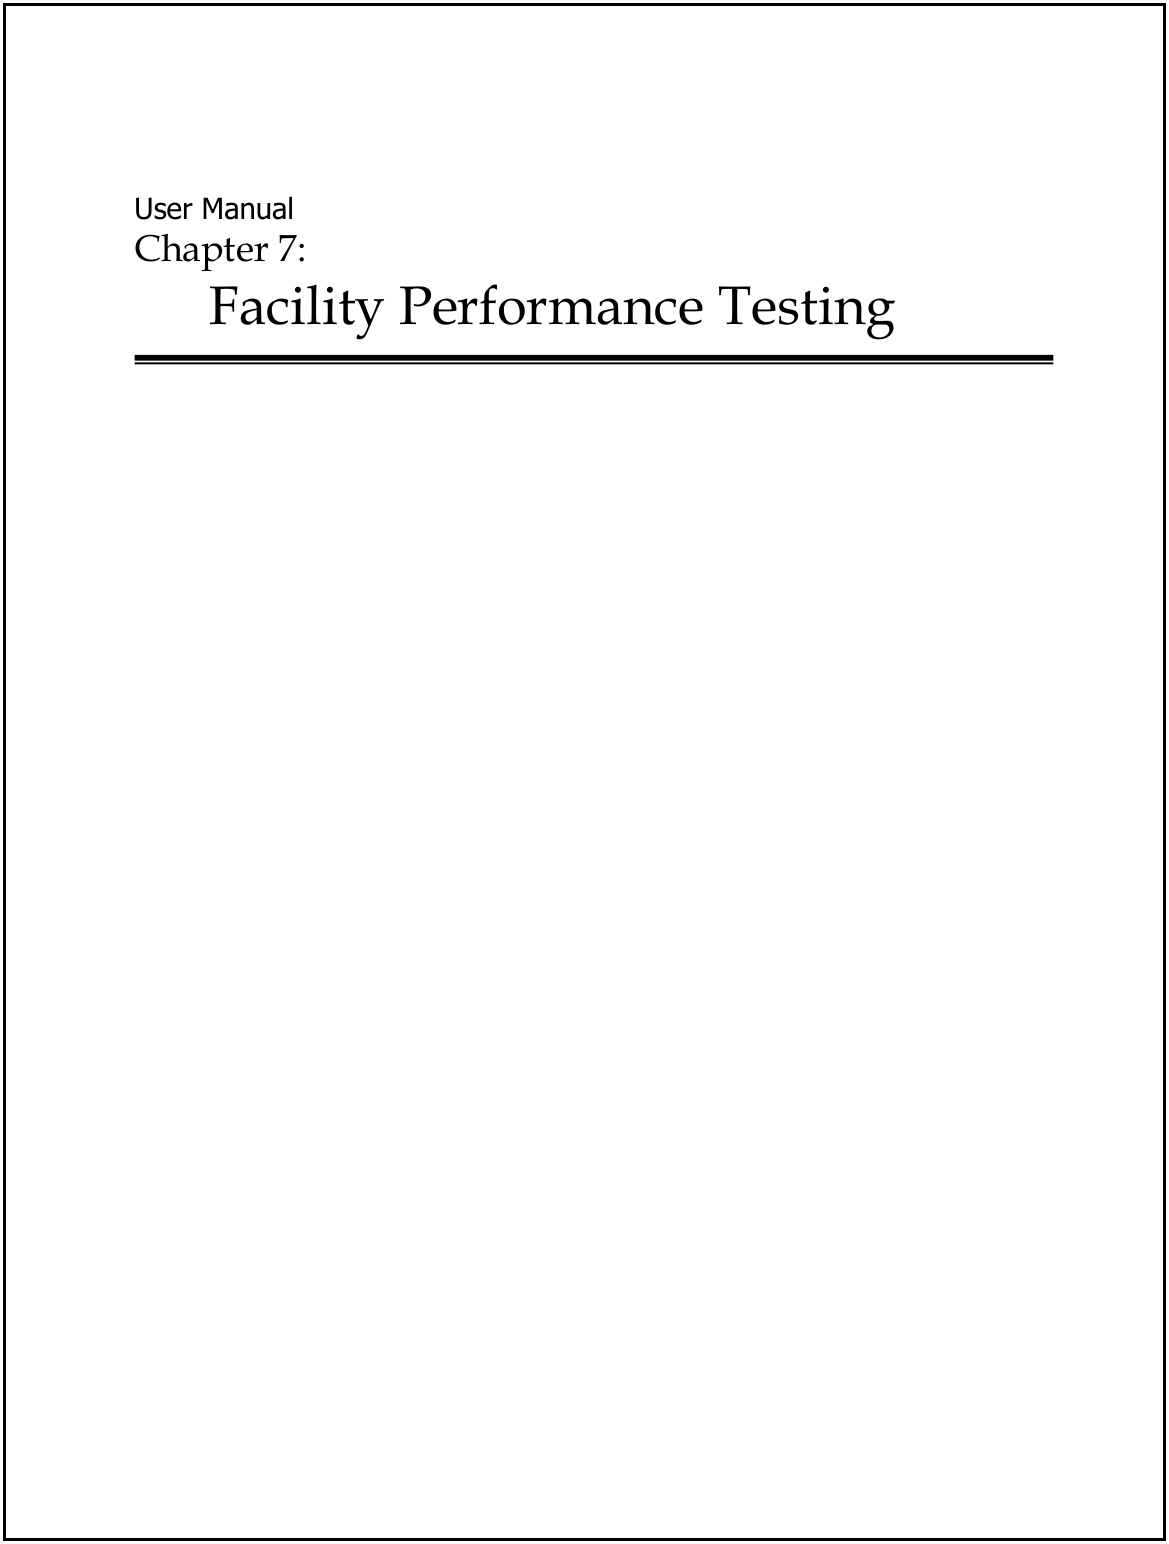  User Manual Chapter 7:  Facility Performance Testing      